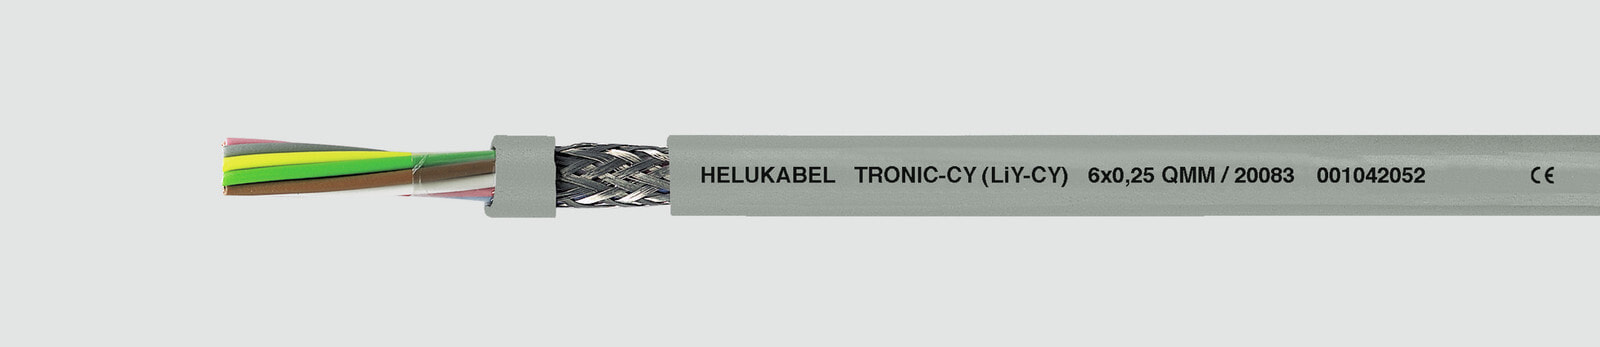 Helukabel TRONIC-CY (LiY-CY) - Low voltage cable - Grey - Polyvinyl chloride (PVC) - Cooper - 0.75 mm² - 87 kg/km